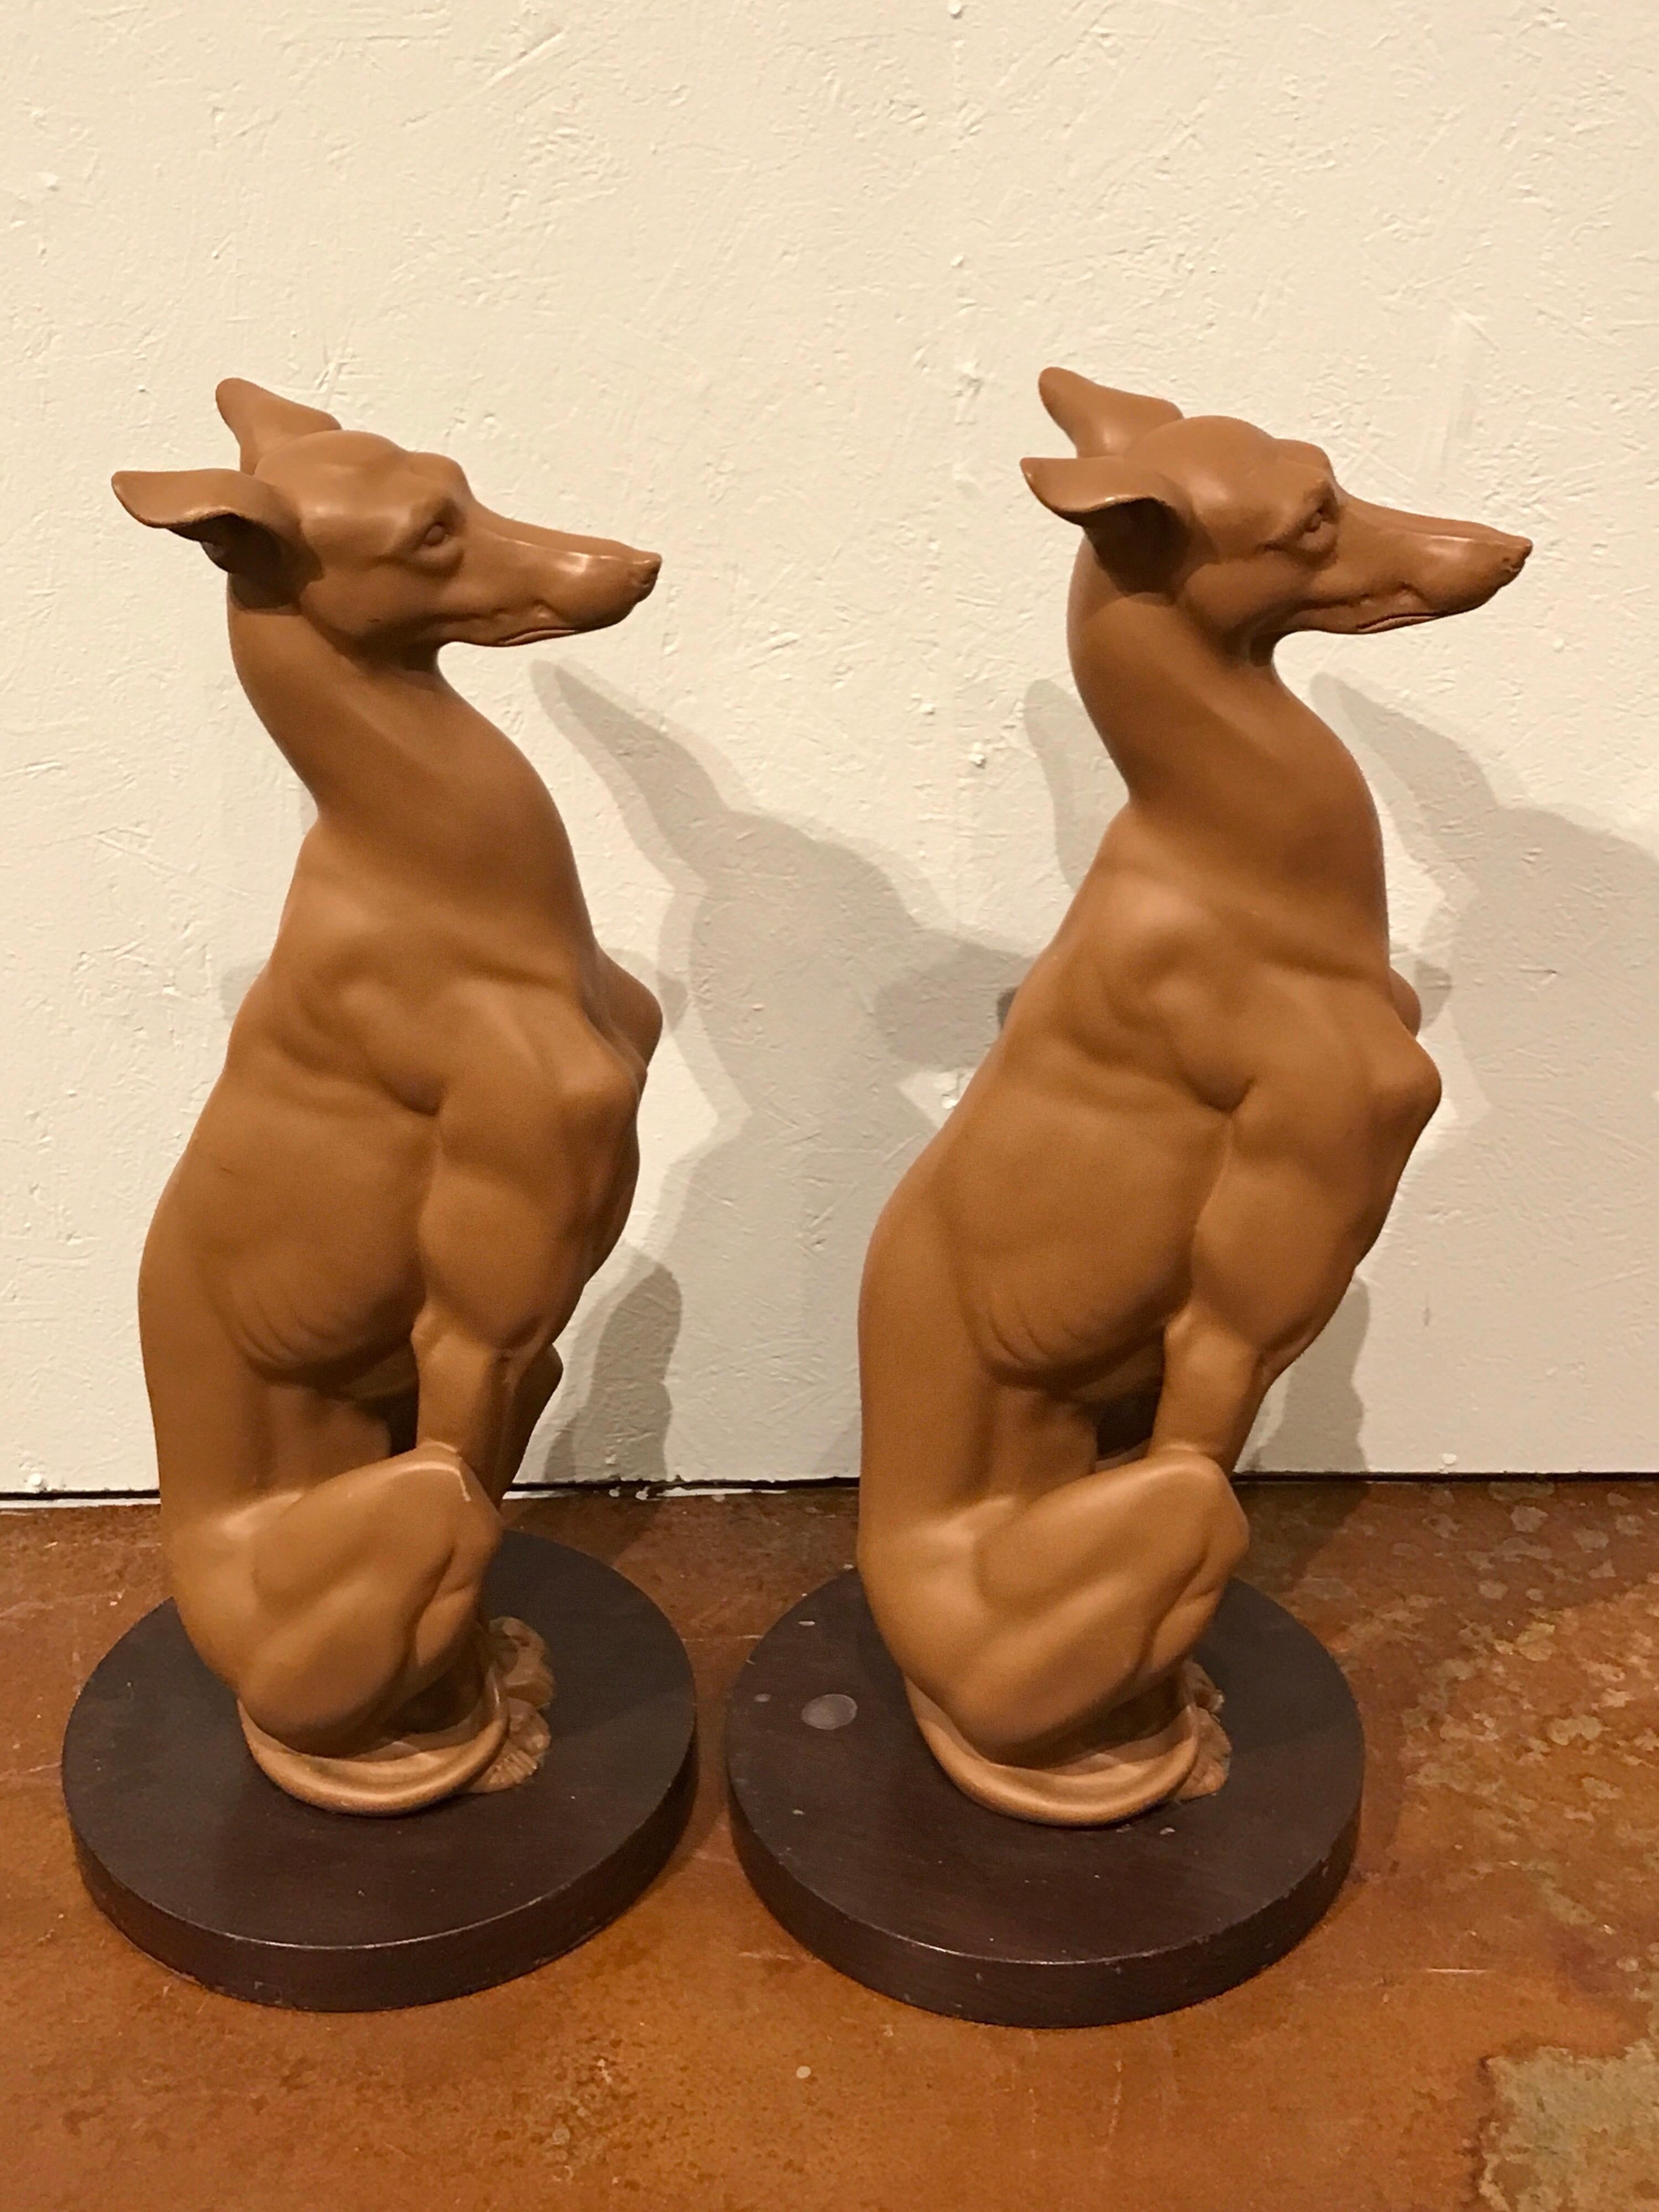 Pair of lifesize whippets, each one of seated form, realistically modeled, raised on a 14